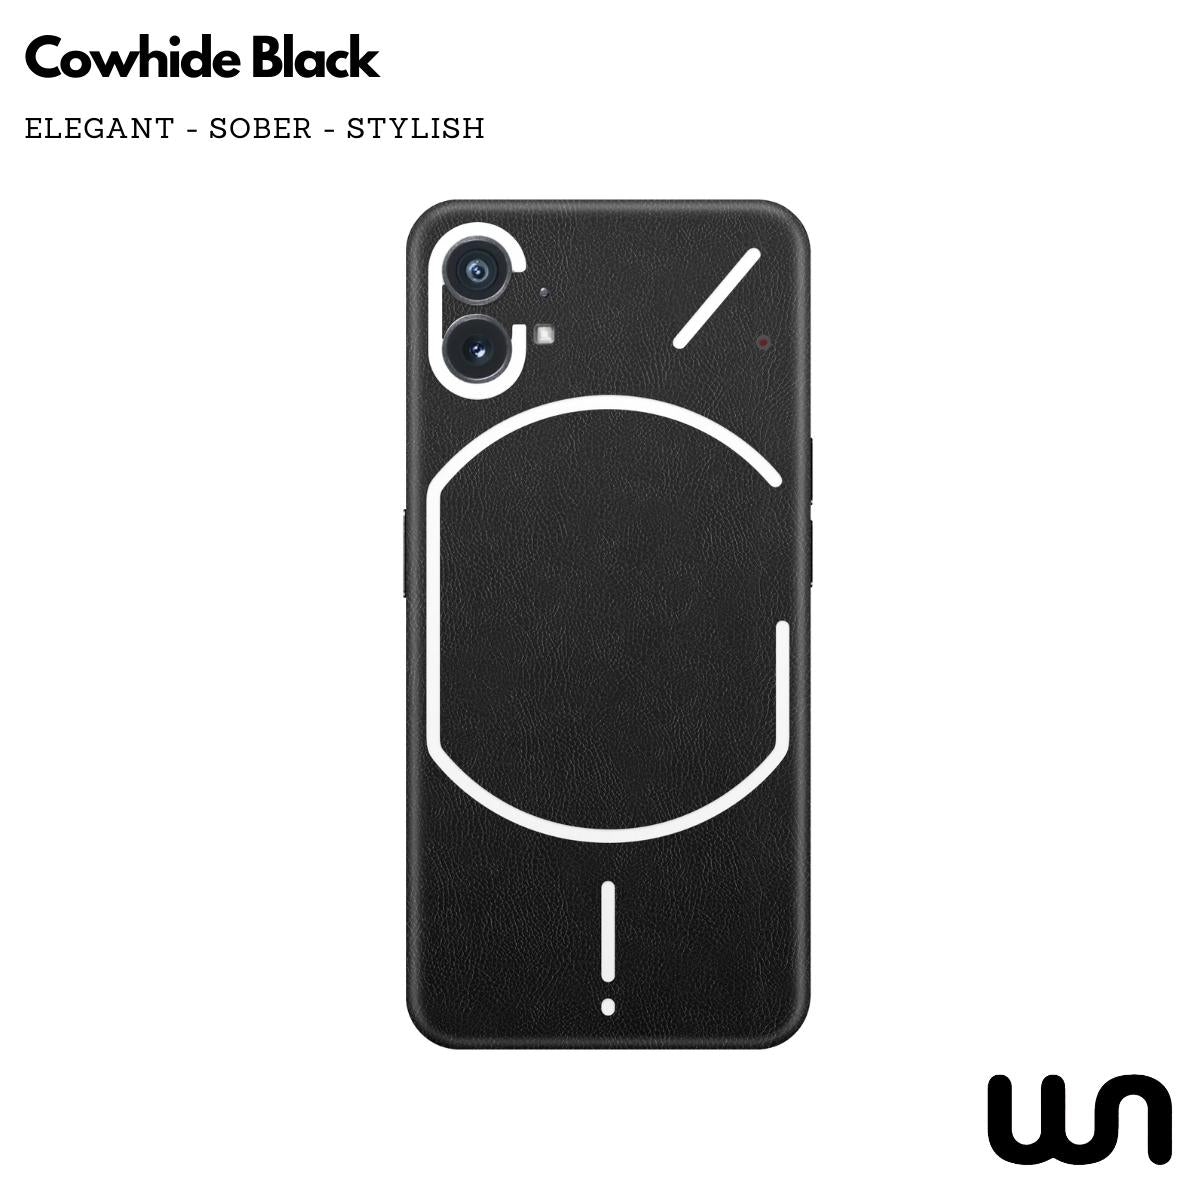 Cowhide Black Textured Skin for Nothing Phone 1